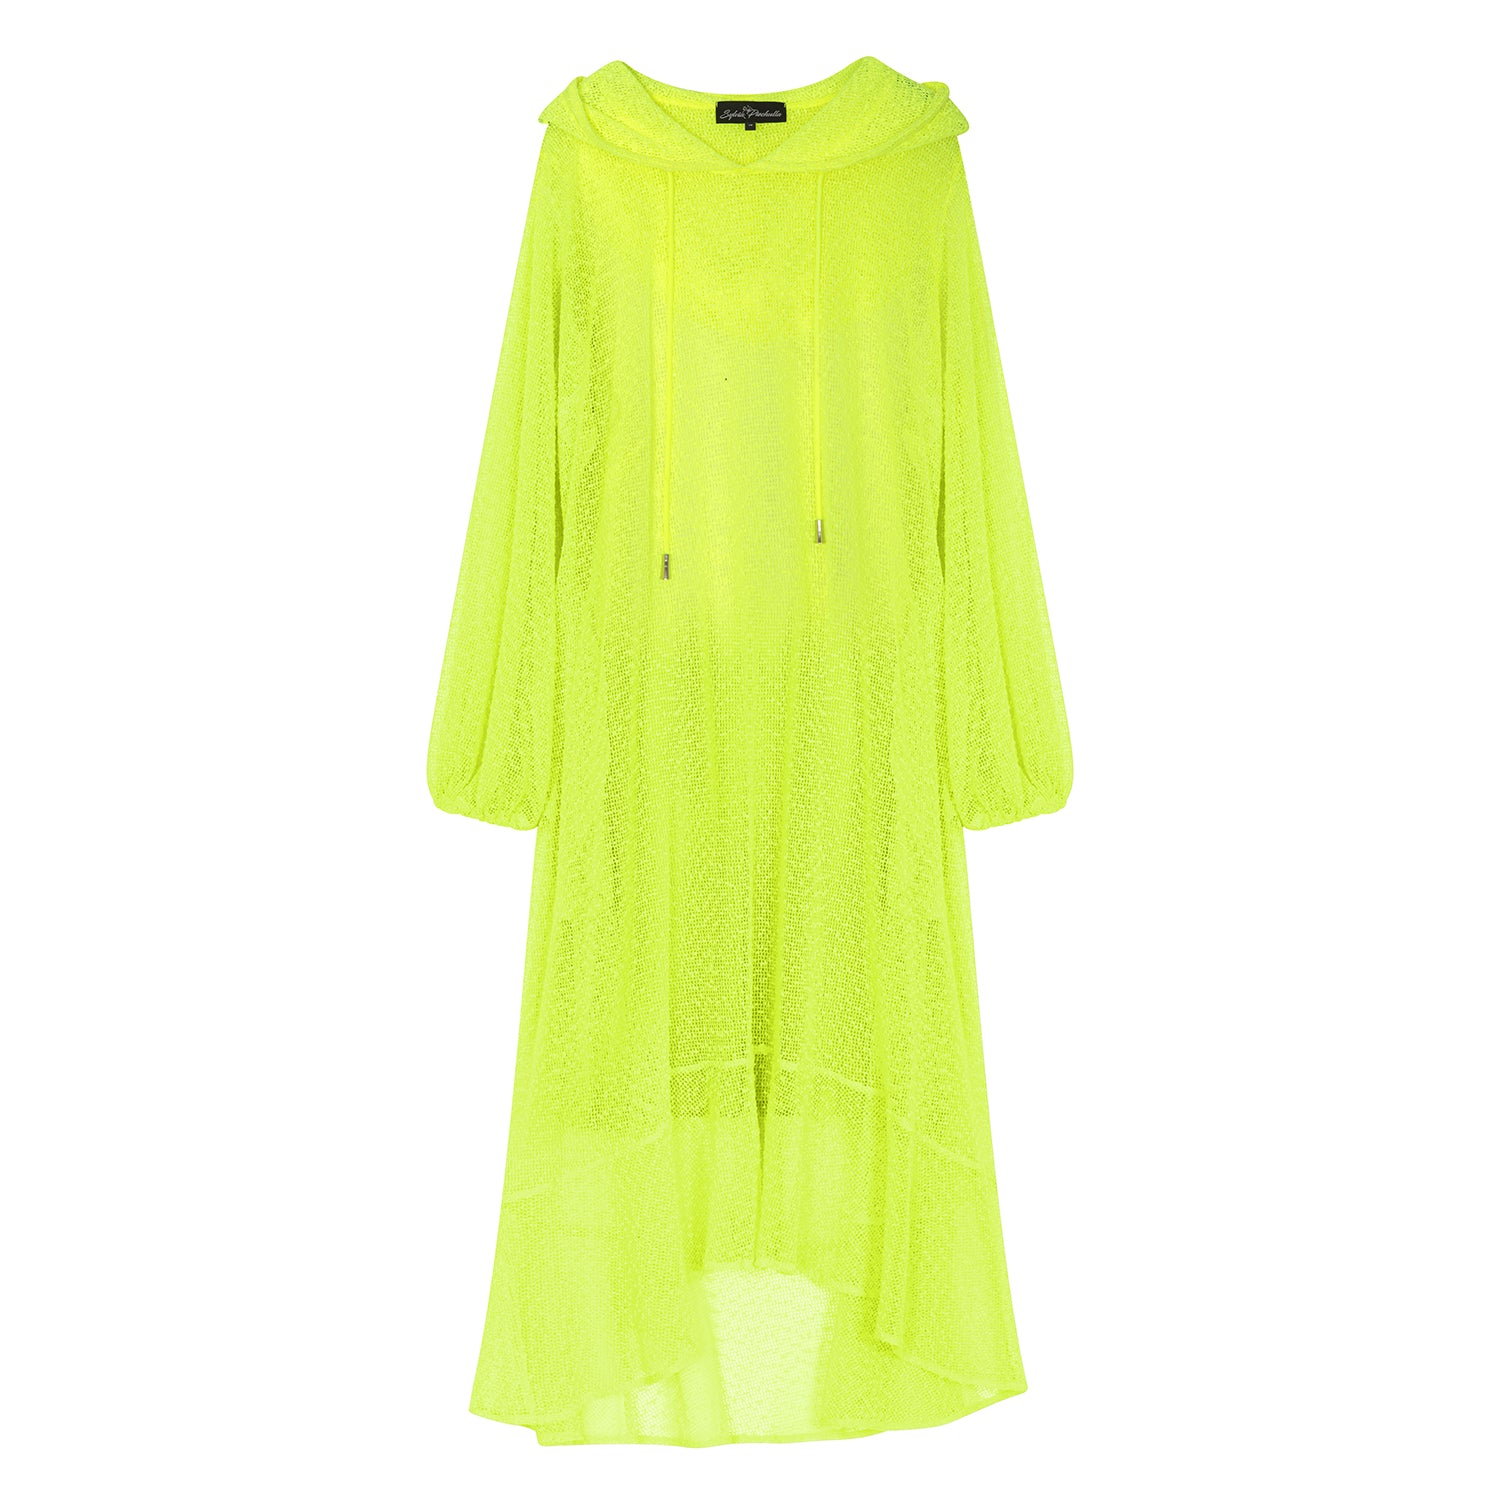 Women's Aphrodite Neon Lime Holiday Resort Dress with hoodie and neon lime undergarment, presented in a cutout image to showcase the vibrant design.